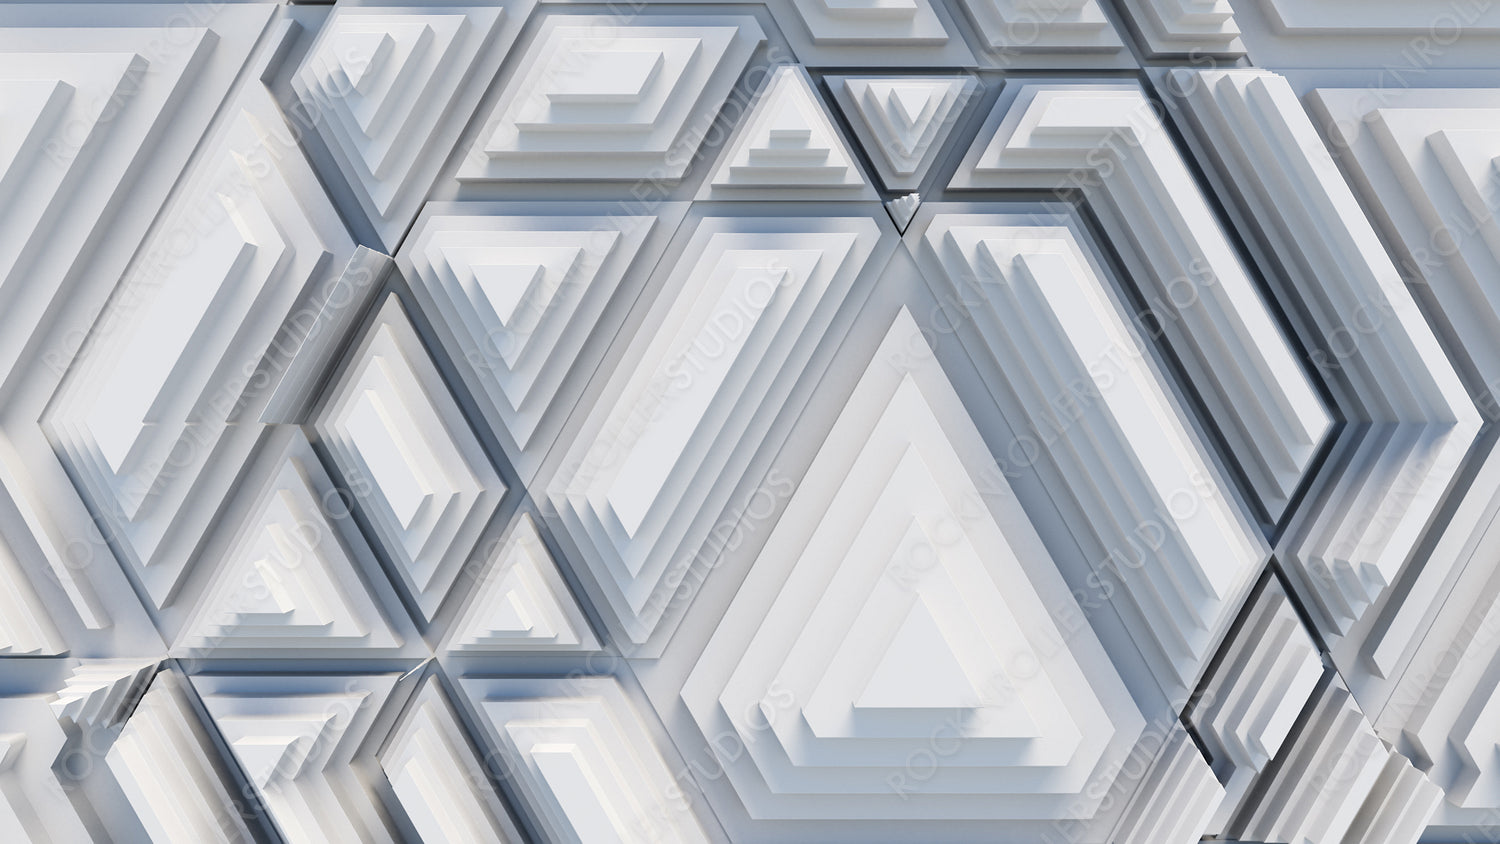 White, Tech Background with a Geometric 3D Structure. Clean, Stepped design with Extruded Futuristic Forms. 3D Render.